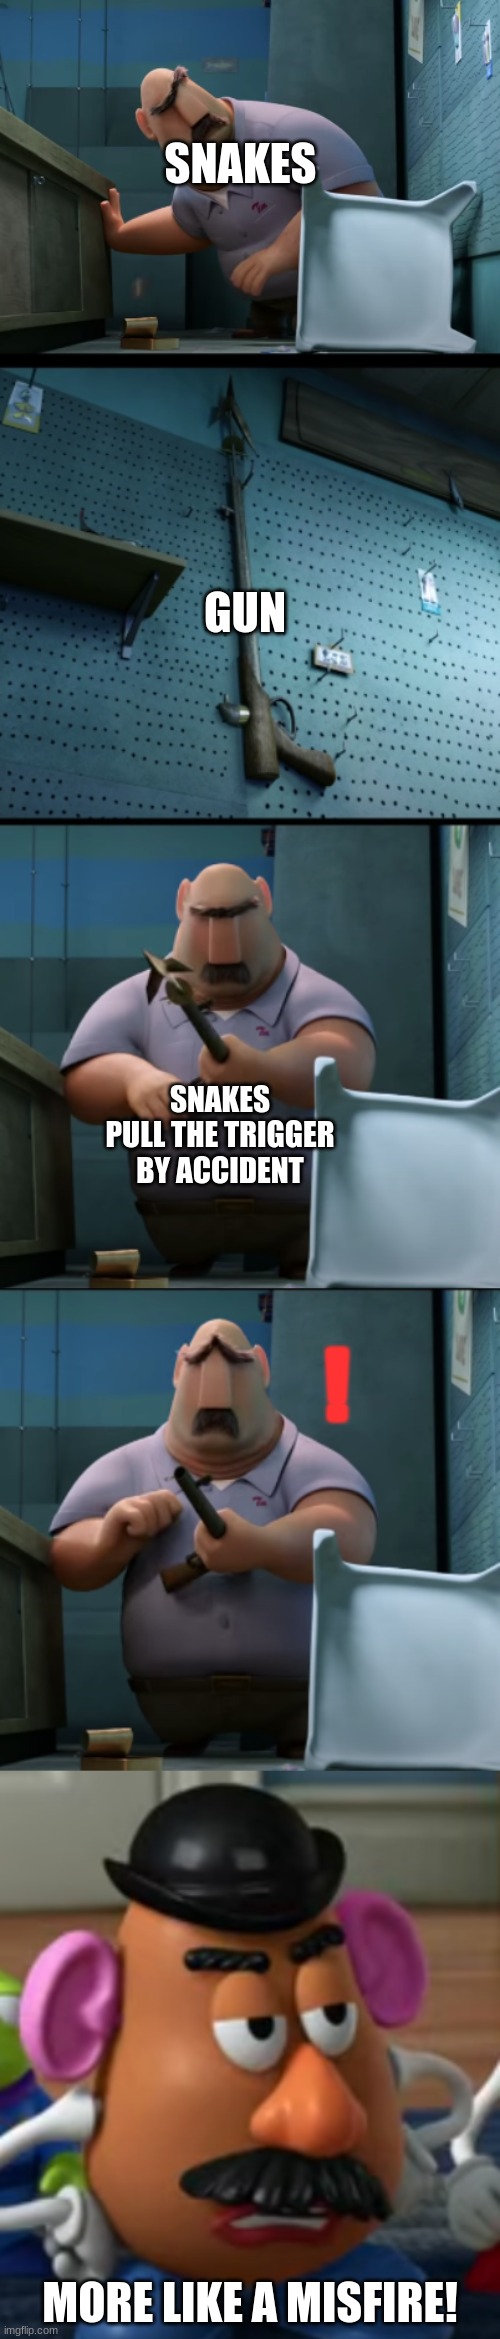 Referencing Metal Gear in cartoons | SNAKES; GUN; SNAKES PULL THE TRIGGER BY ACCIDENT; ! MORE LIKE A MISFIRE! | image tagged in metal gear solid | made w/ Imgflip meme maker